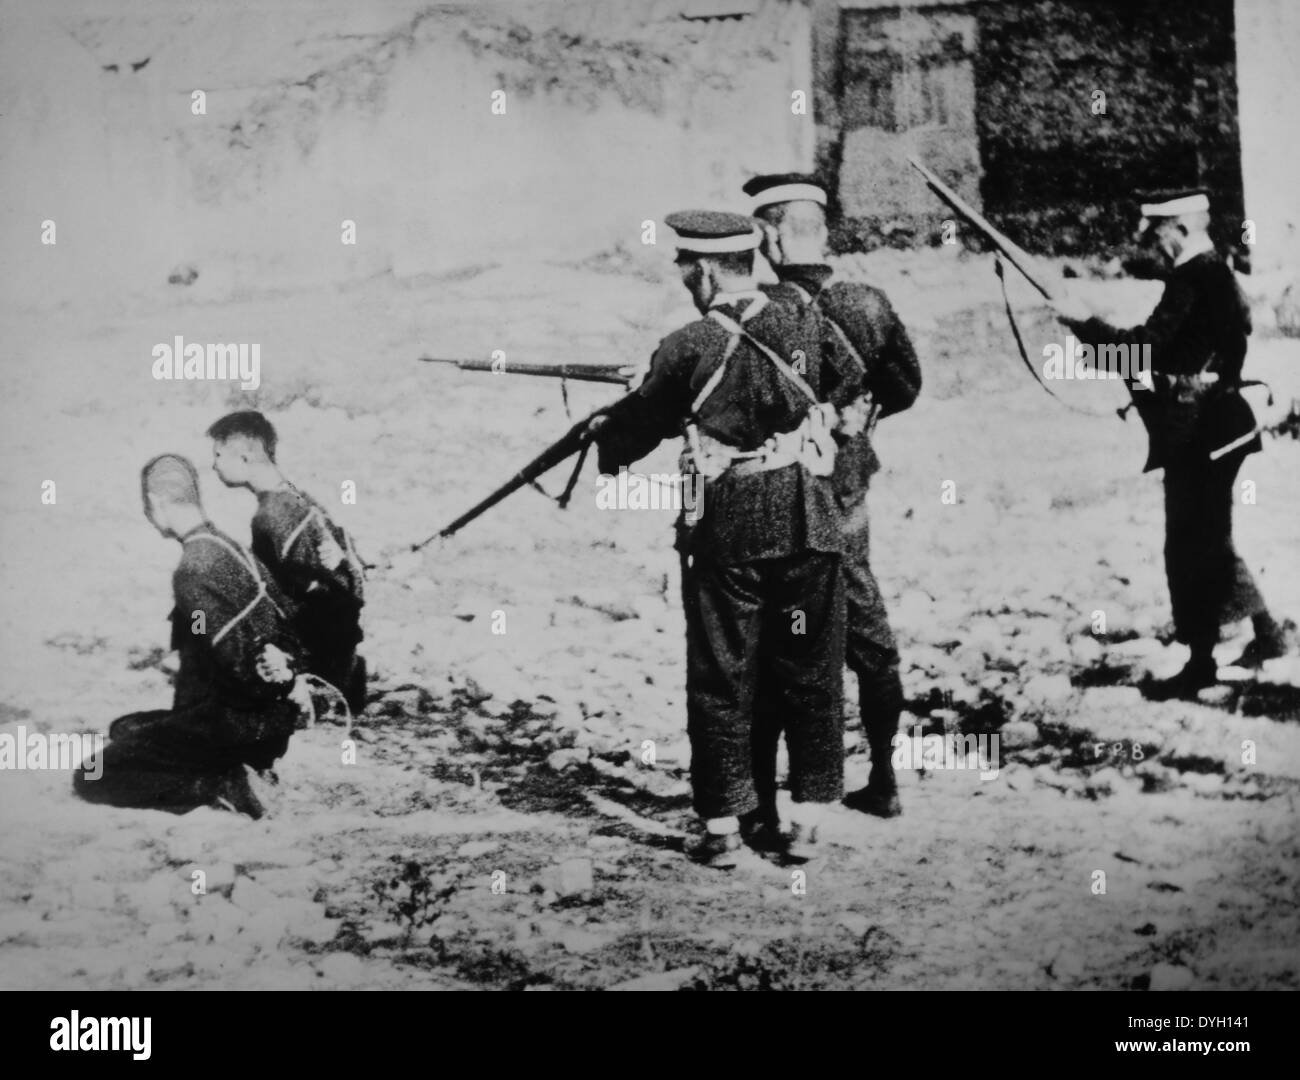 Execution of Two Chinese Men by Japanese Soldiers during Second Sino-Japanese War, circa 1937 Stock Photo